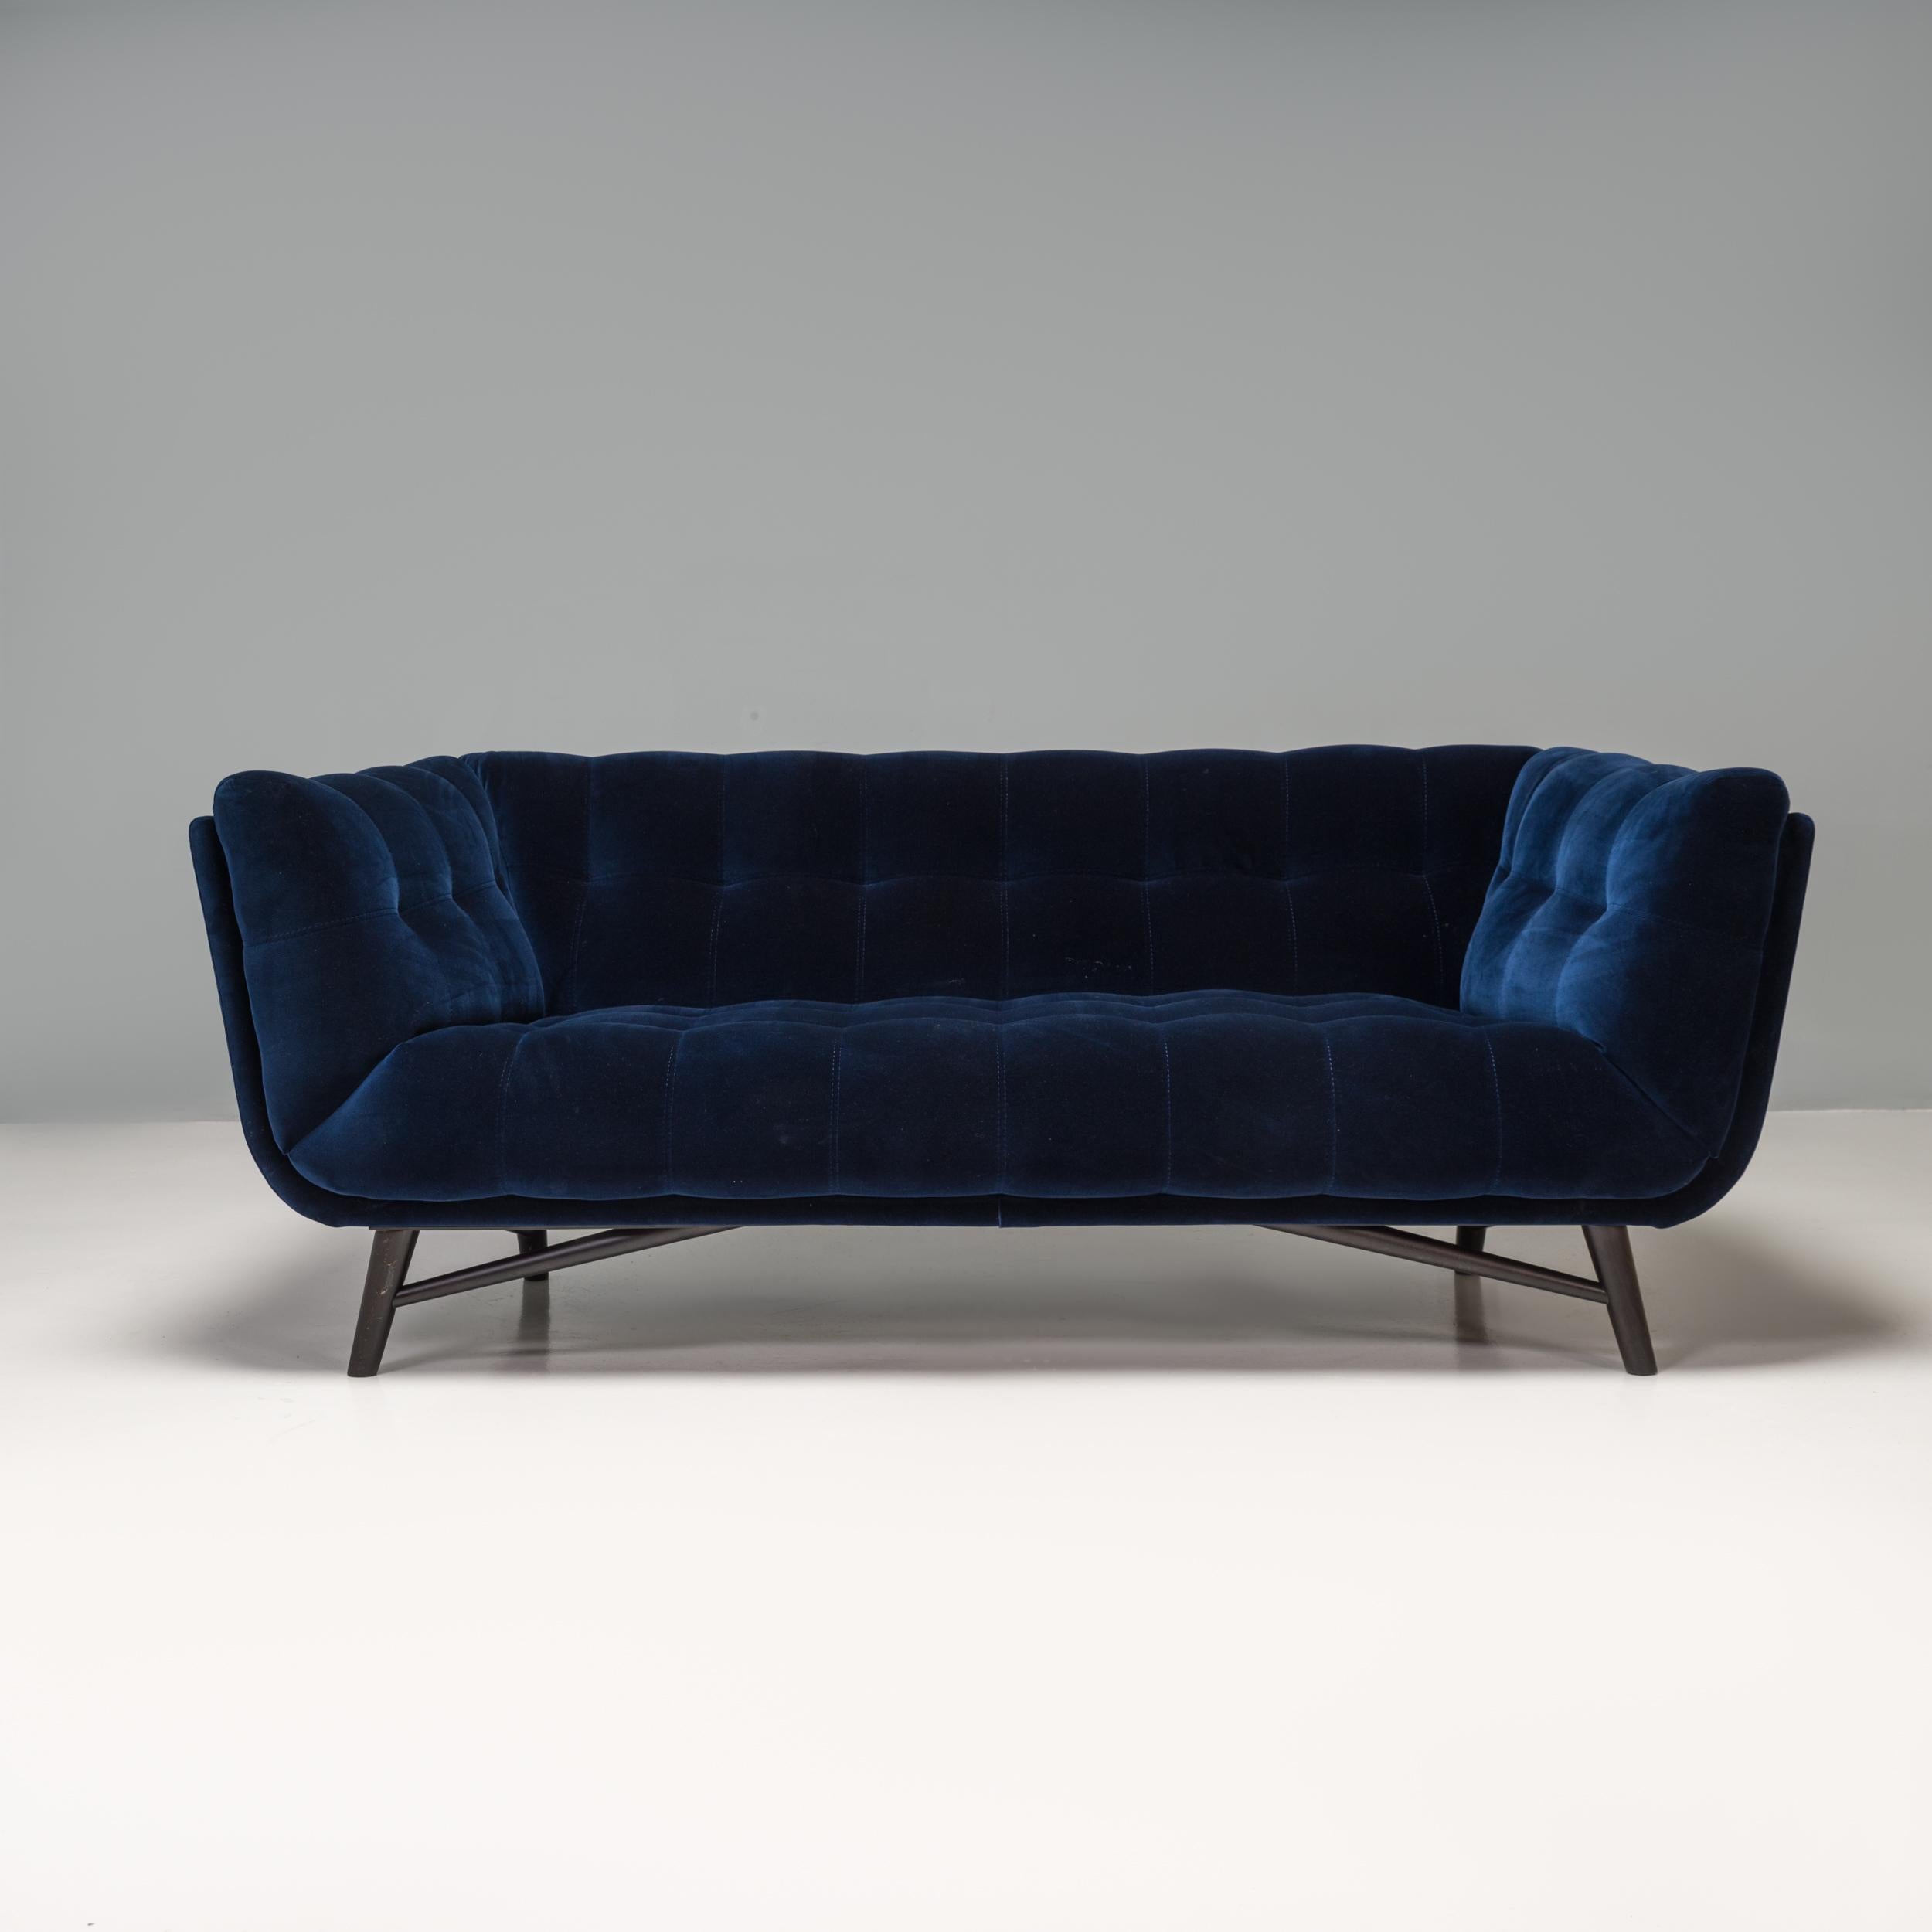 Designed by Roberto Tapinassi and Maurizio Manzoni for Roche Bobois, the Profile sofa offers a contemporary update on the classic Mid-Century Tuxedo style.

Constructed from a fir wood and pine ply structure, the sofa sits on four angular legs in